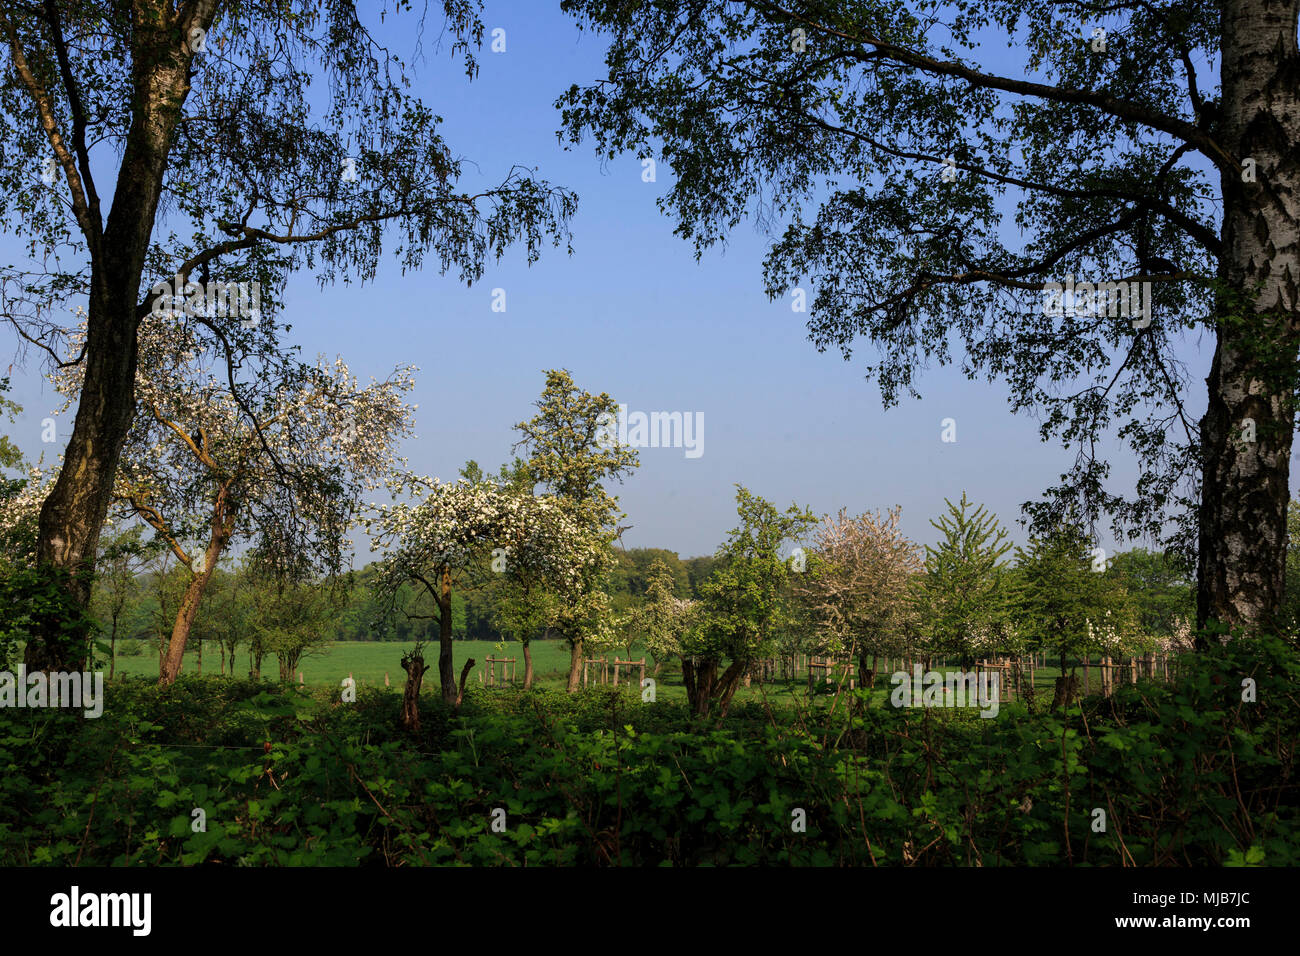 Meadow with blossoming fruit trees, Mülheim an der Ruhr, Germany Stock Photo